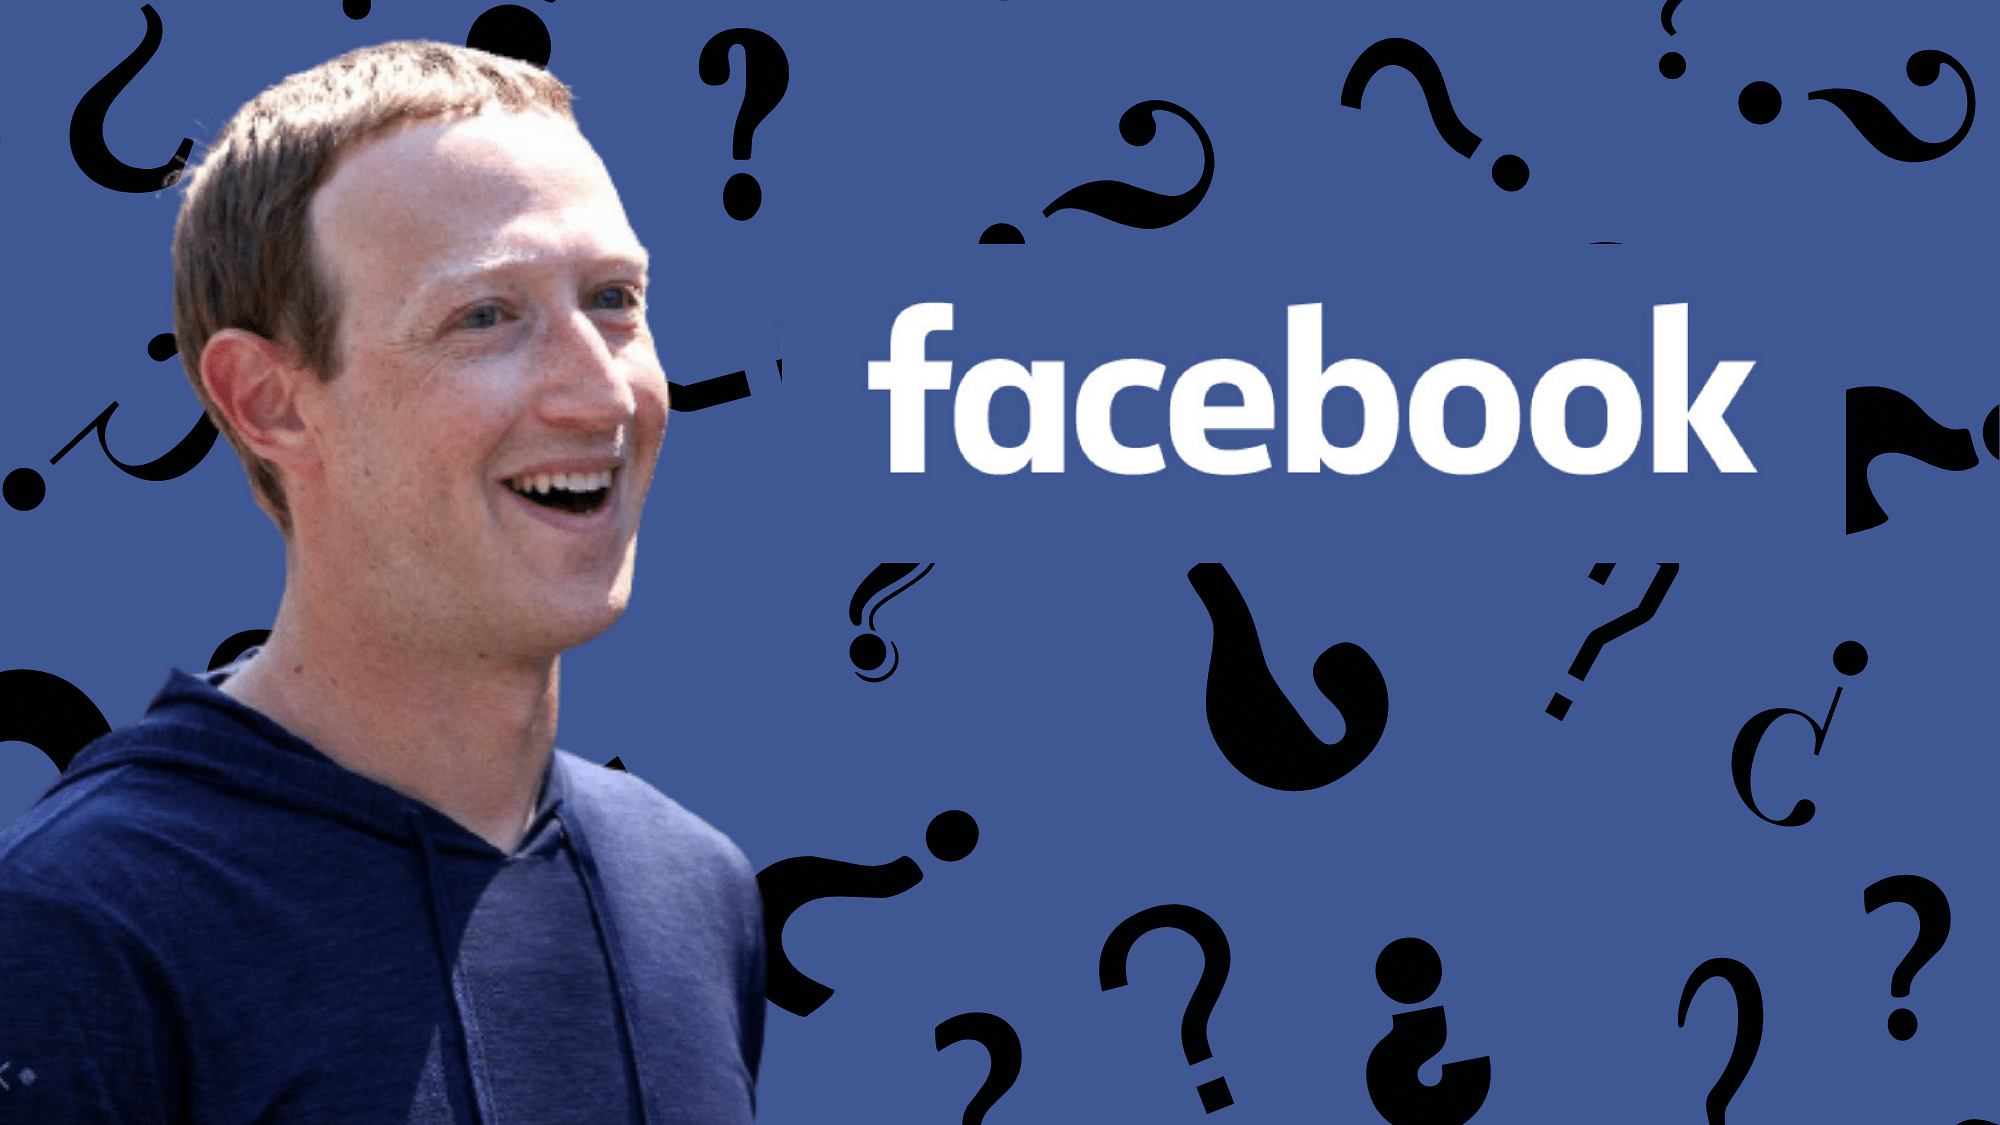 <div class="paragraphs"><p>Mark Zuckerberg recently <ins><a href="https://www.theverge.com/22588022/mark-zuckerberg-facebook-ceo-metaverse-interview">announced</a></ins> the tech giant will shift from being a social media company to becoming “a metaverse company.”</p></div>